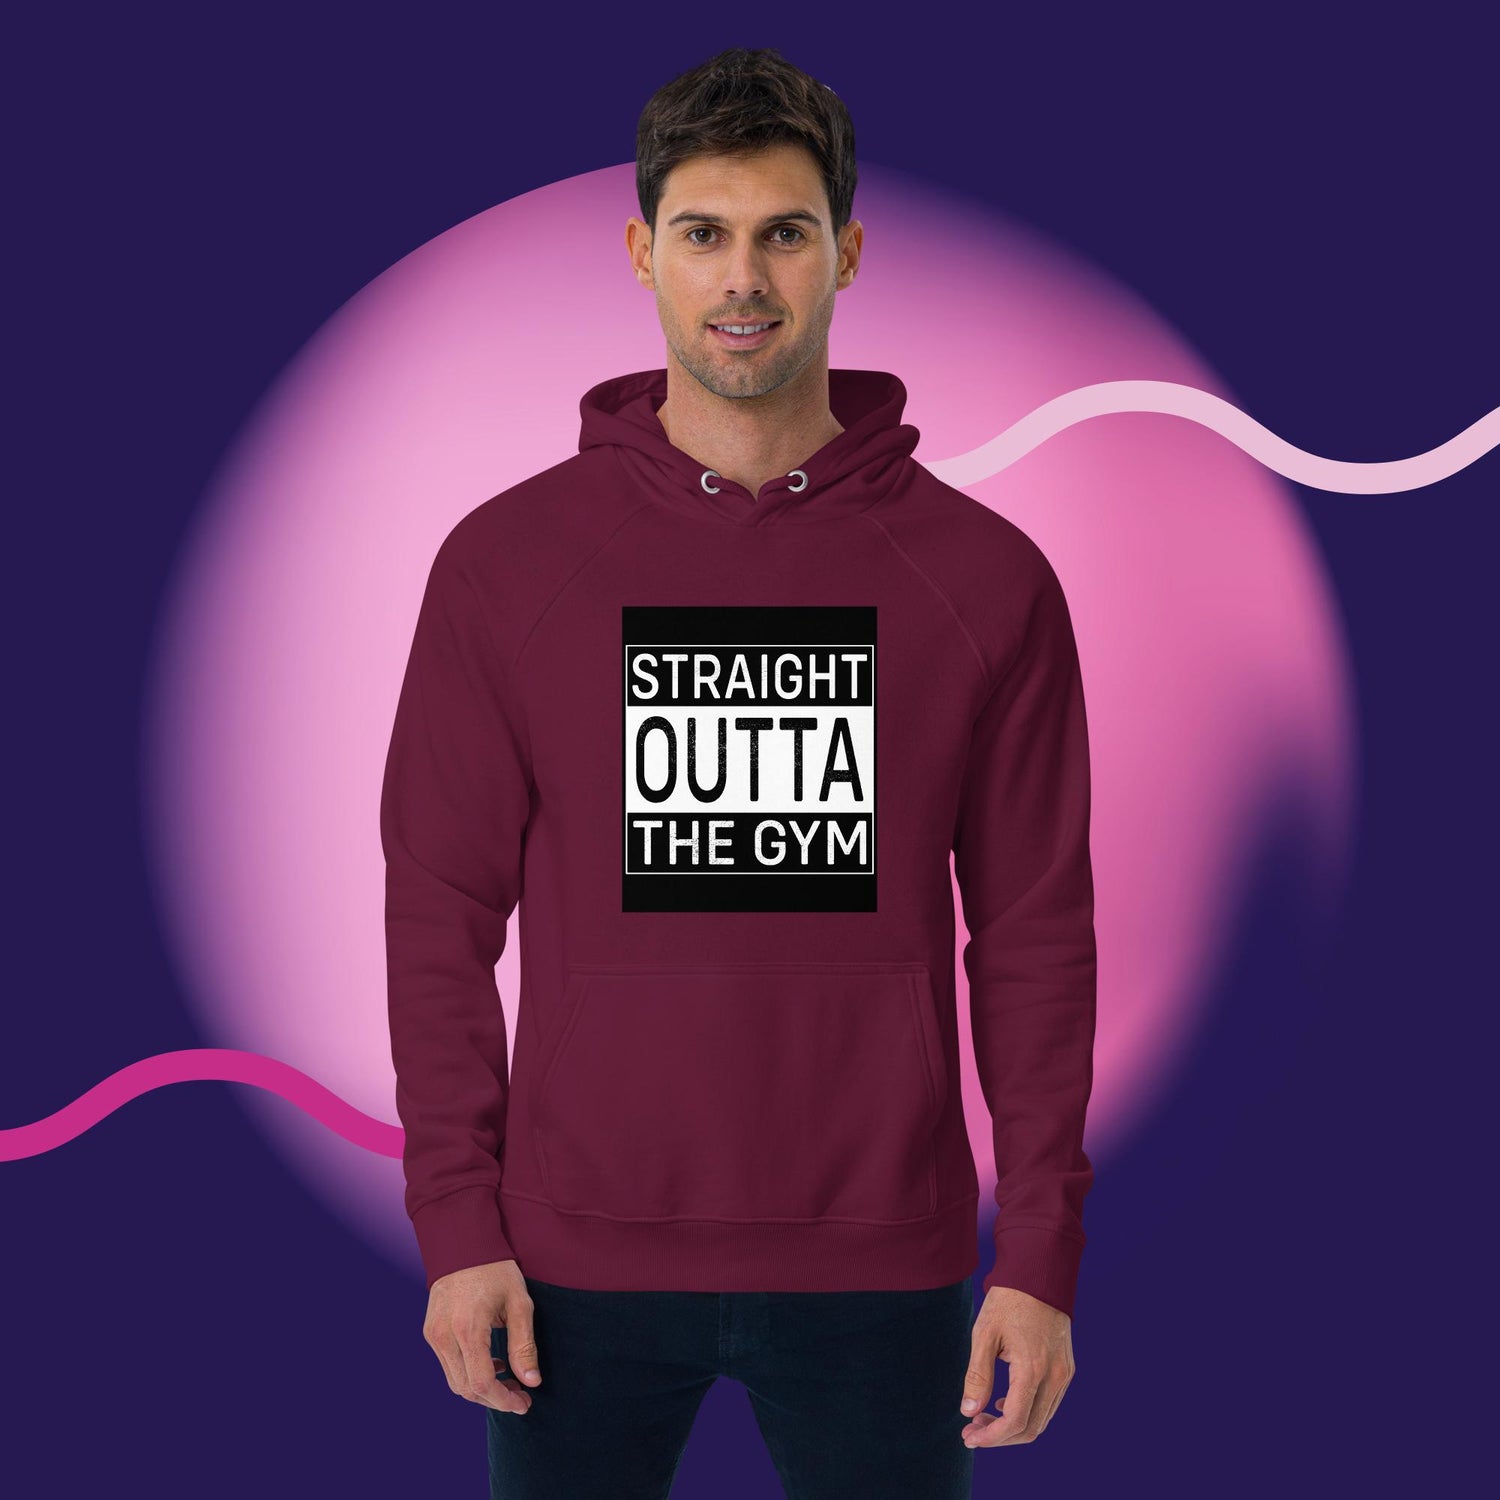 Sparkle-kiss-creations-straight-out-of-the-gym-sweatshirt-burgandy